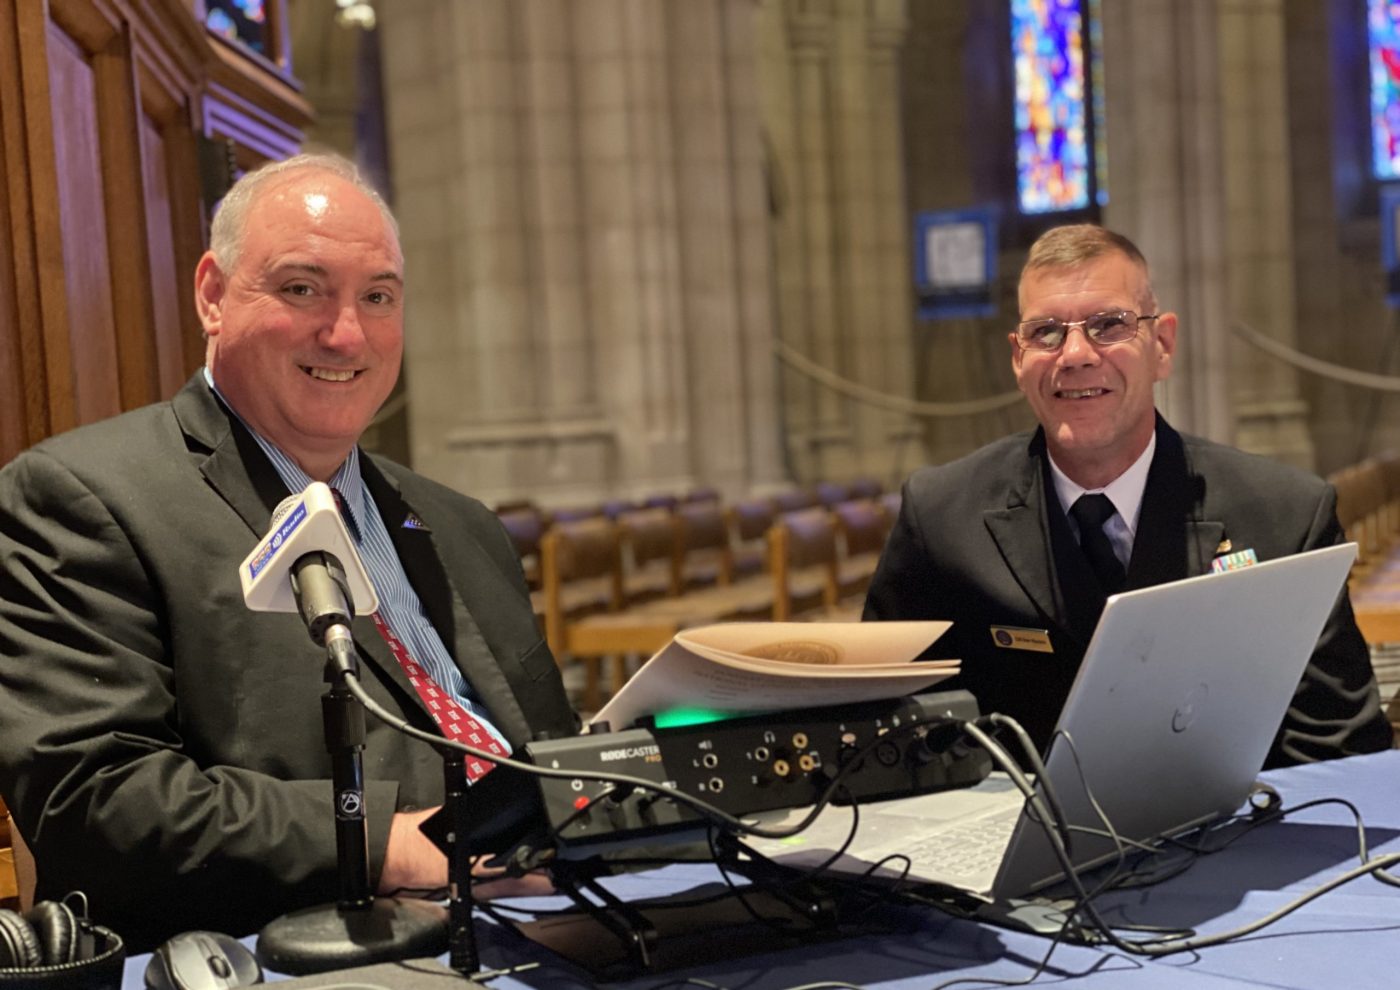 Wreaths Across America Radio’s Jeff Pierce (L) and Navy Cmdr. Brian Wierzbicki of DOD’s Vietnam War Commemoration project at the station’s broadcast of a “Celebration of Character and Courage” at the Washington National Cathedral on Jan. 13, 2024.